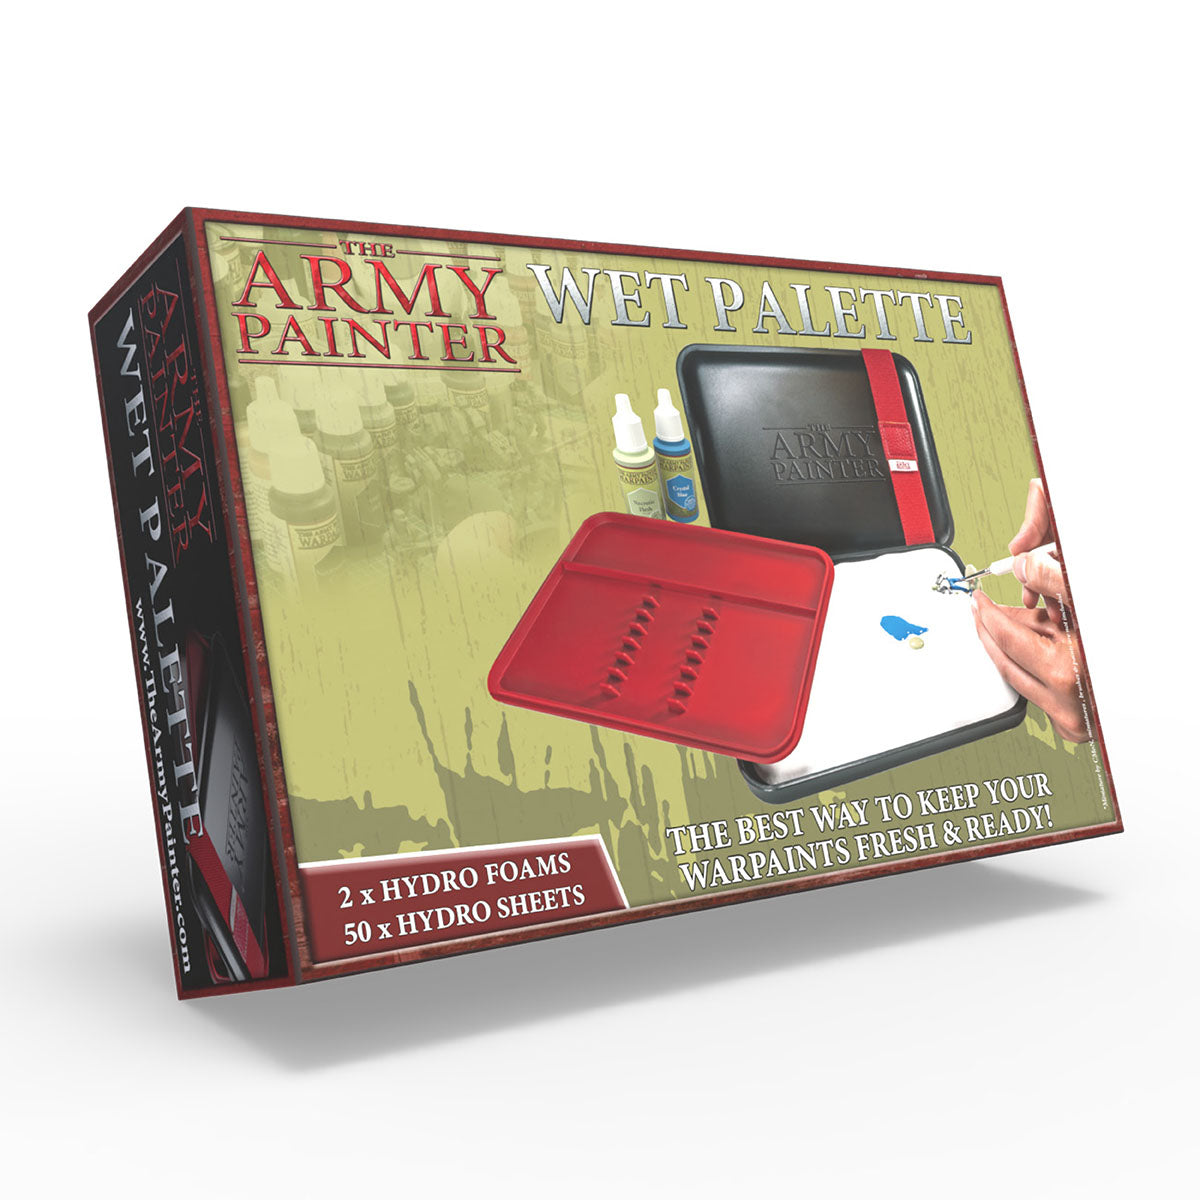 Army Painter: Wet Palette | Impulse Games and Hobbies